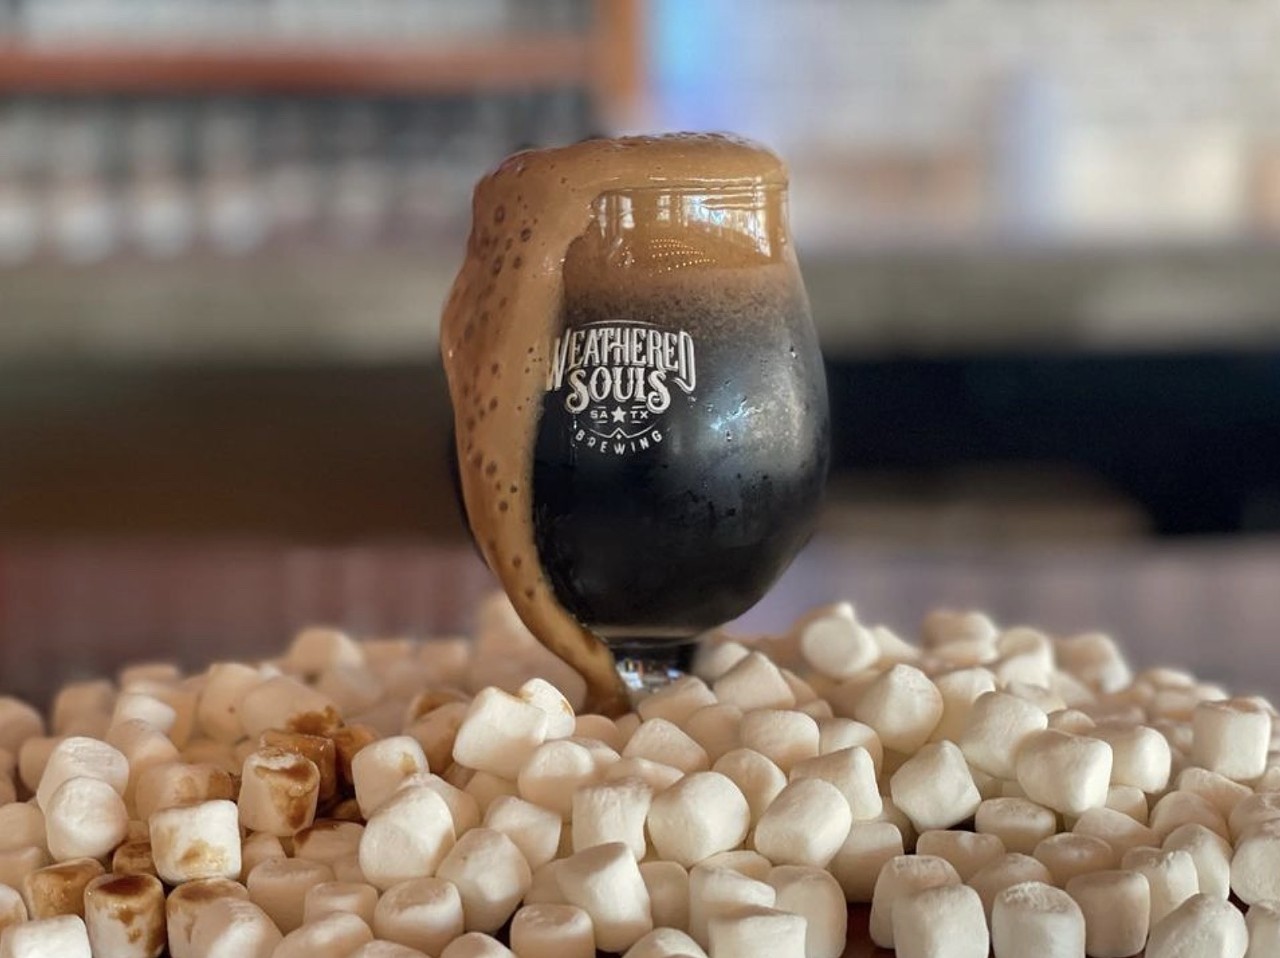 Weathered Souls Brewing Co.
606 Embassy Oaks - Suite 500, (210) 274-6824, weatheredsouls.beer
A 2023 James Beard Foundation nominee, Weathered Souls Brewing made a name for itself back in 2020 with its Black is Beautiful social justice campaign. You can still get the signature brew at the northeast SA taproom, but we’d encourage you to try any of its other many brews while you’re there.